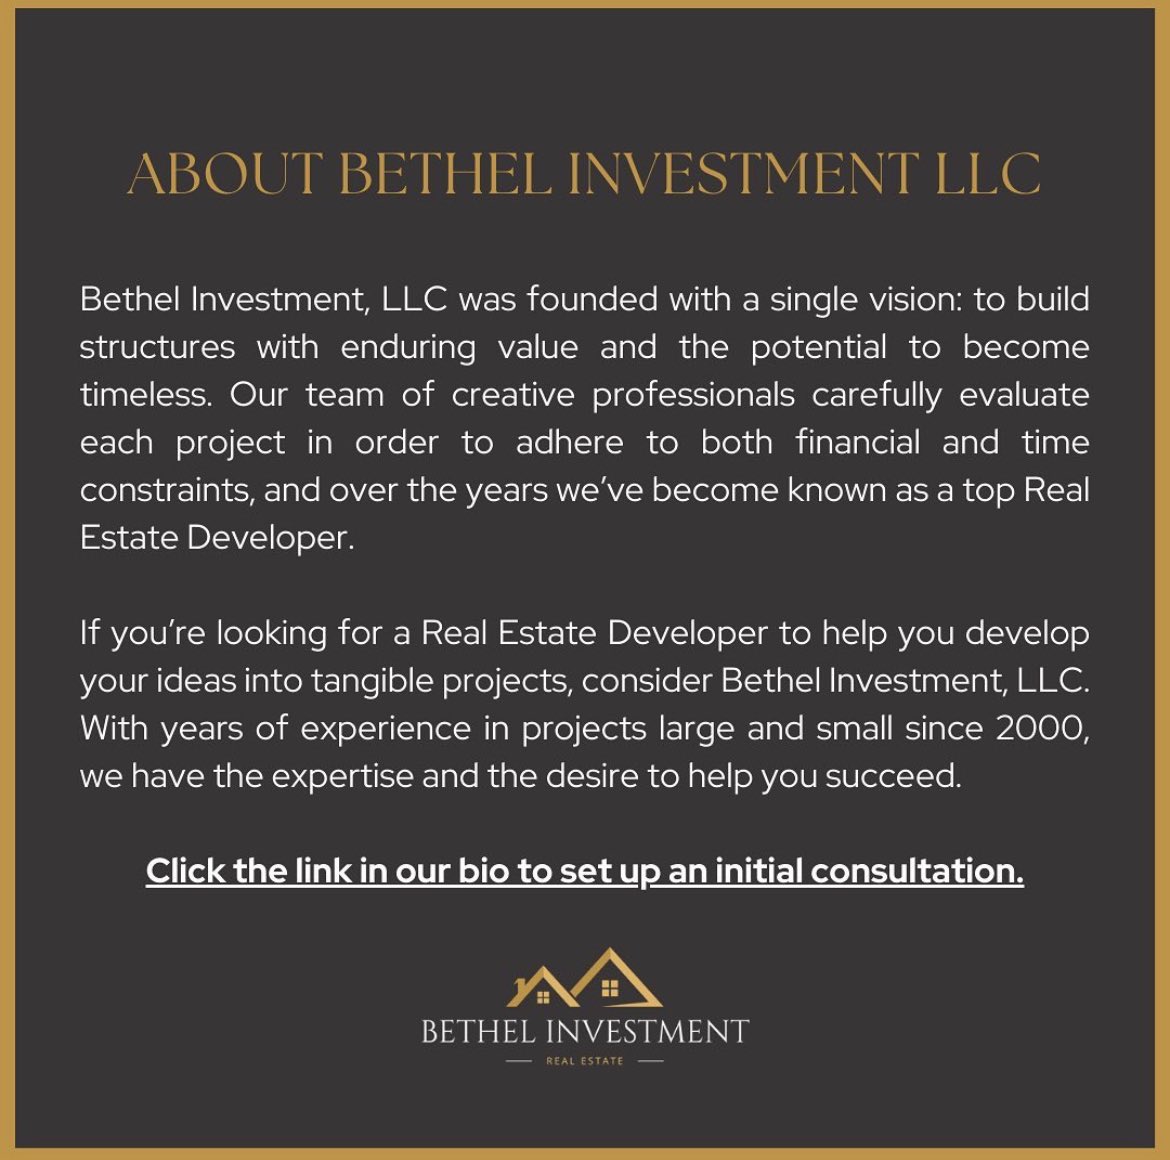 Bethel Investment, LLC was founded with a single vision: to build structures with enduring value and the potential to become timeless. consultation.

#Bethellnvestment #NewJersey #NJHomes #NJLocal #NewJerseyLife #NJRealEstate #NJRealty #NJRealtor #NJRealtors #NewJerseyRealEstate